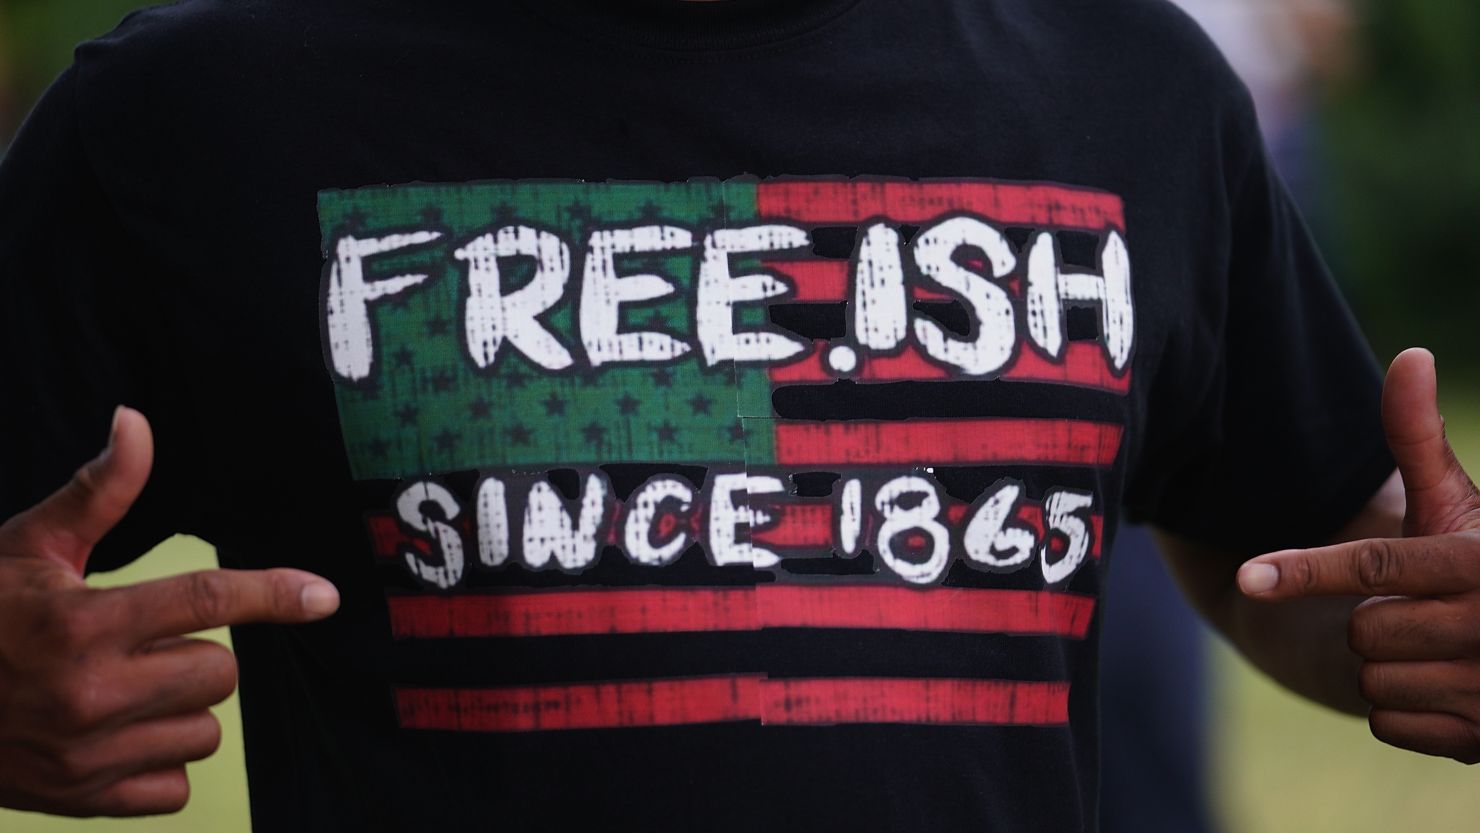 A man sports a shirt celebrating Black freedom during 2020 Juneteenth observances in Tulsa, Oklahoma.